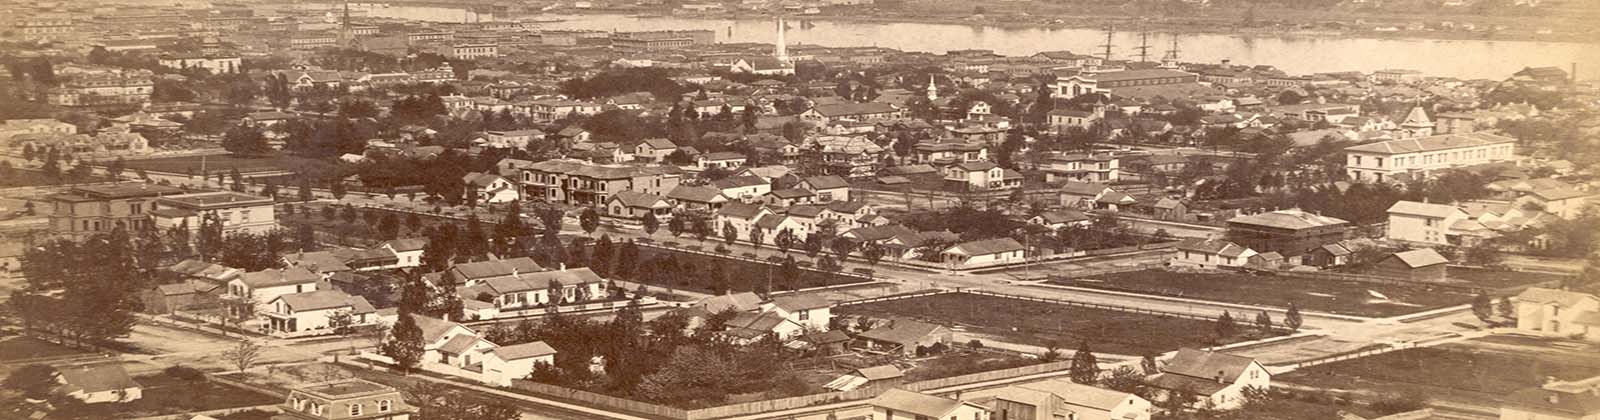 Historic photograph showing view of Portland, ME.